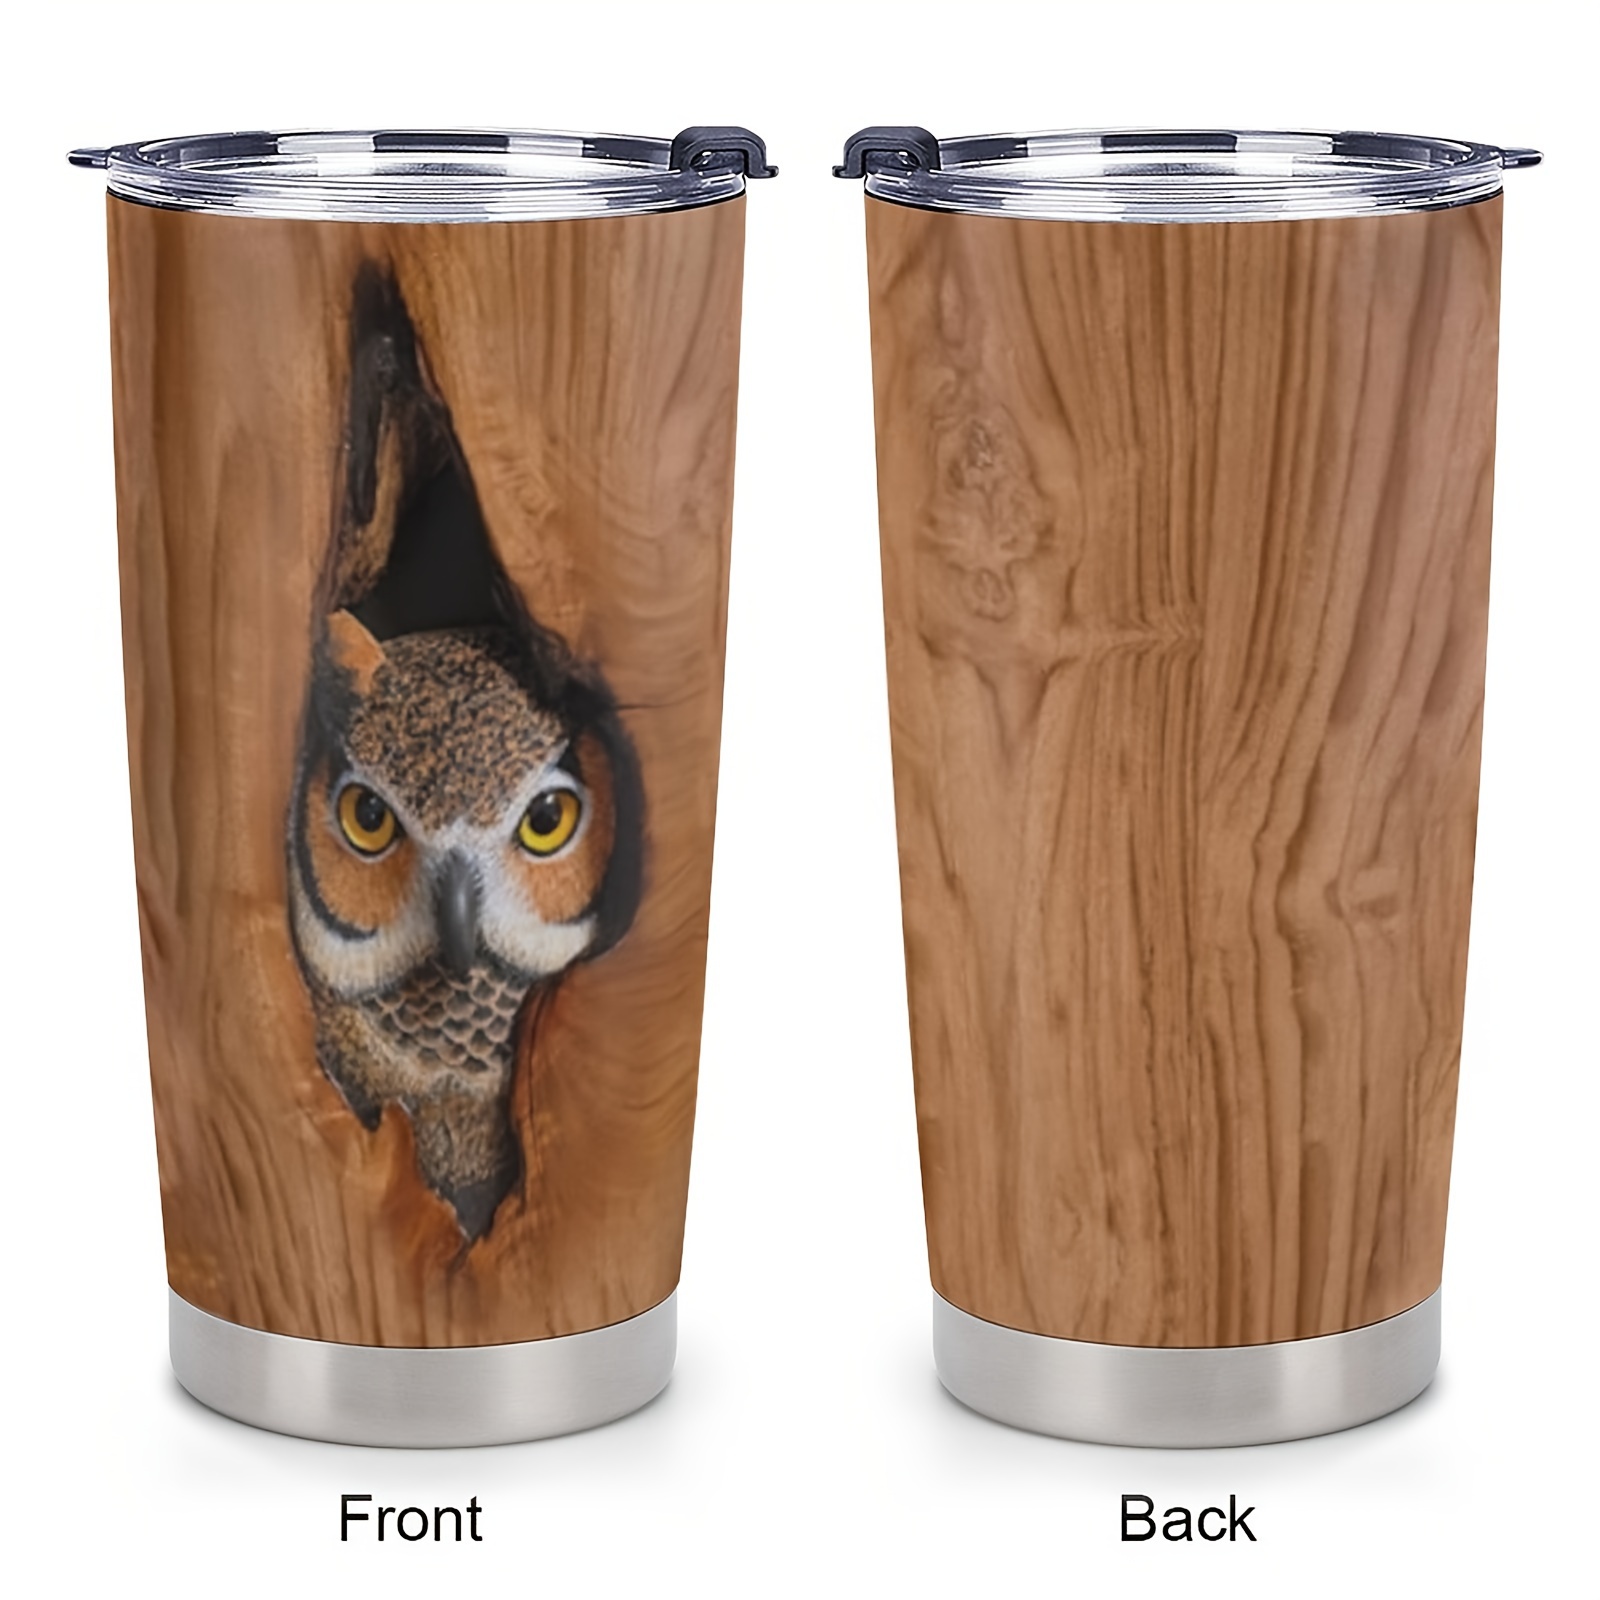 Valentine's Day Presents – The Wooden Owl